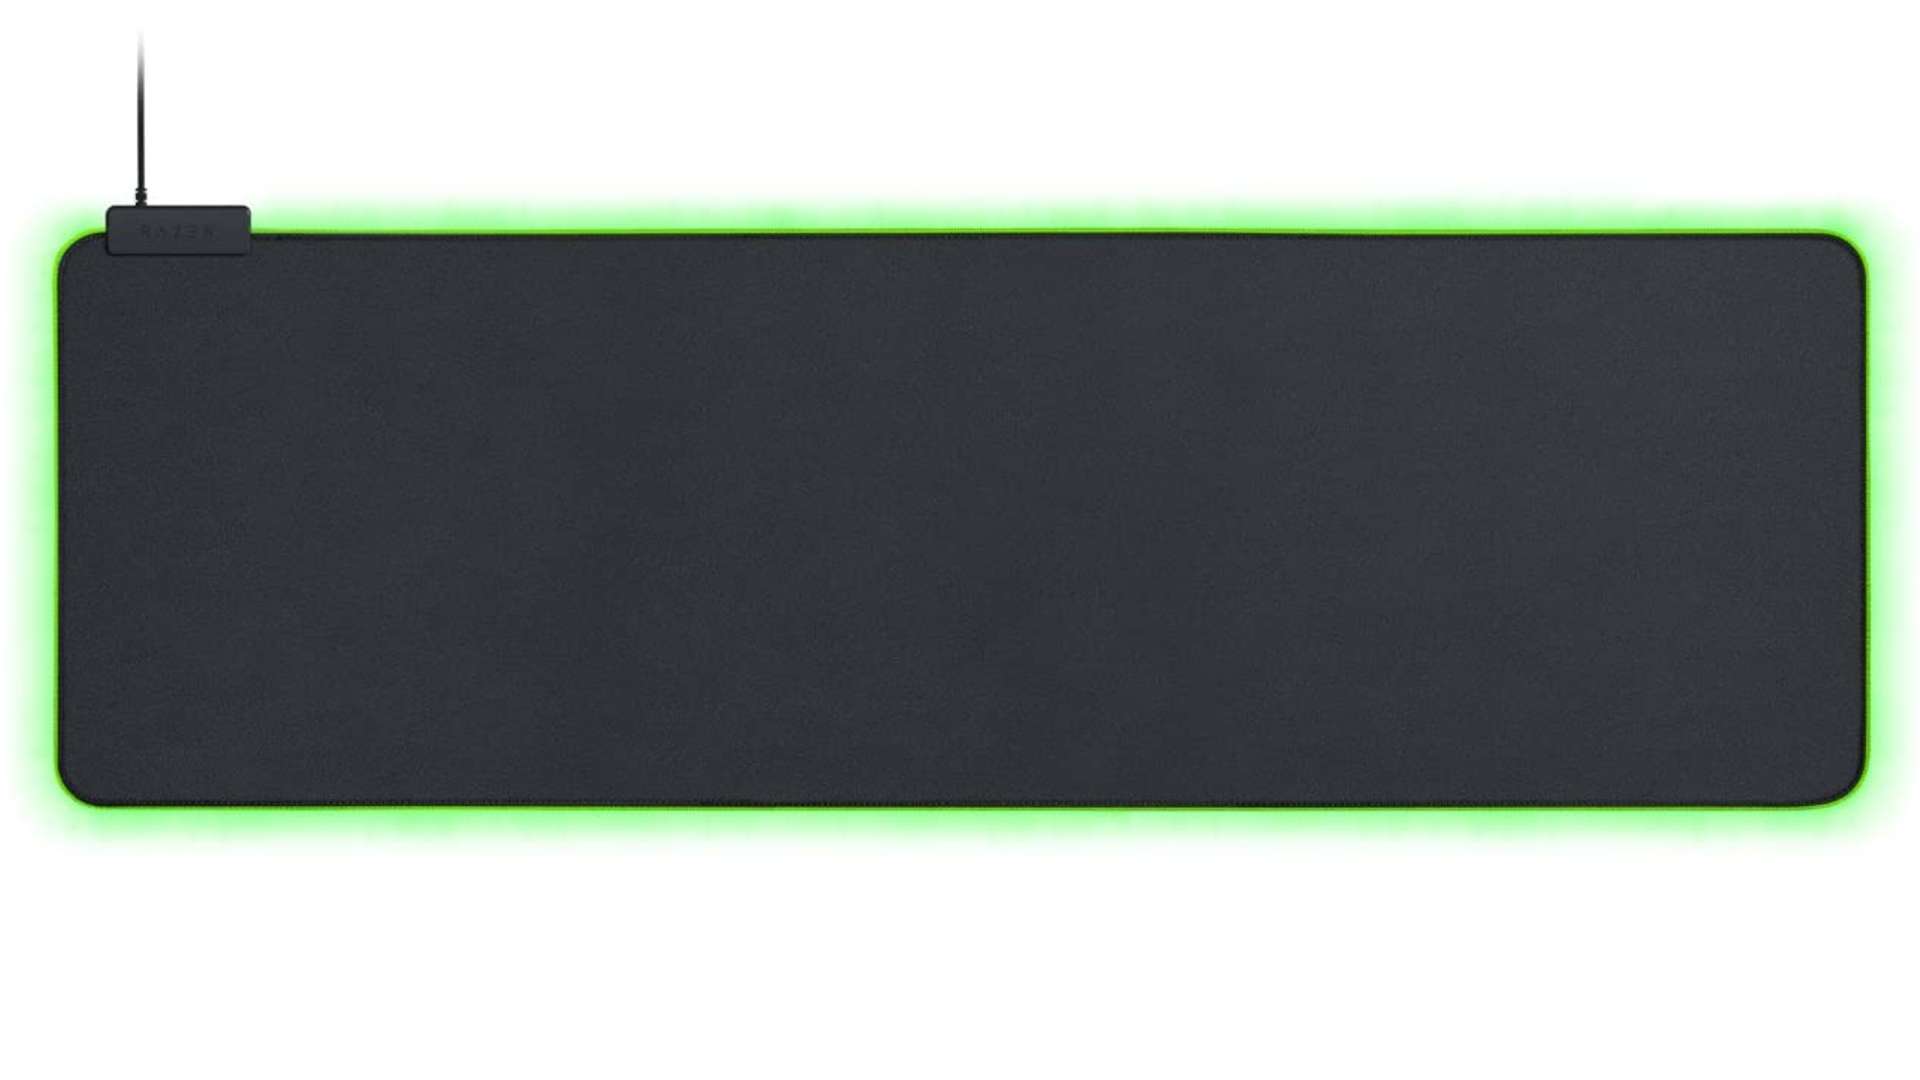 A Razer Goliathus Extended Chroma mouse pad has green RGB lit-up edges against a white background